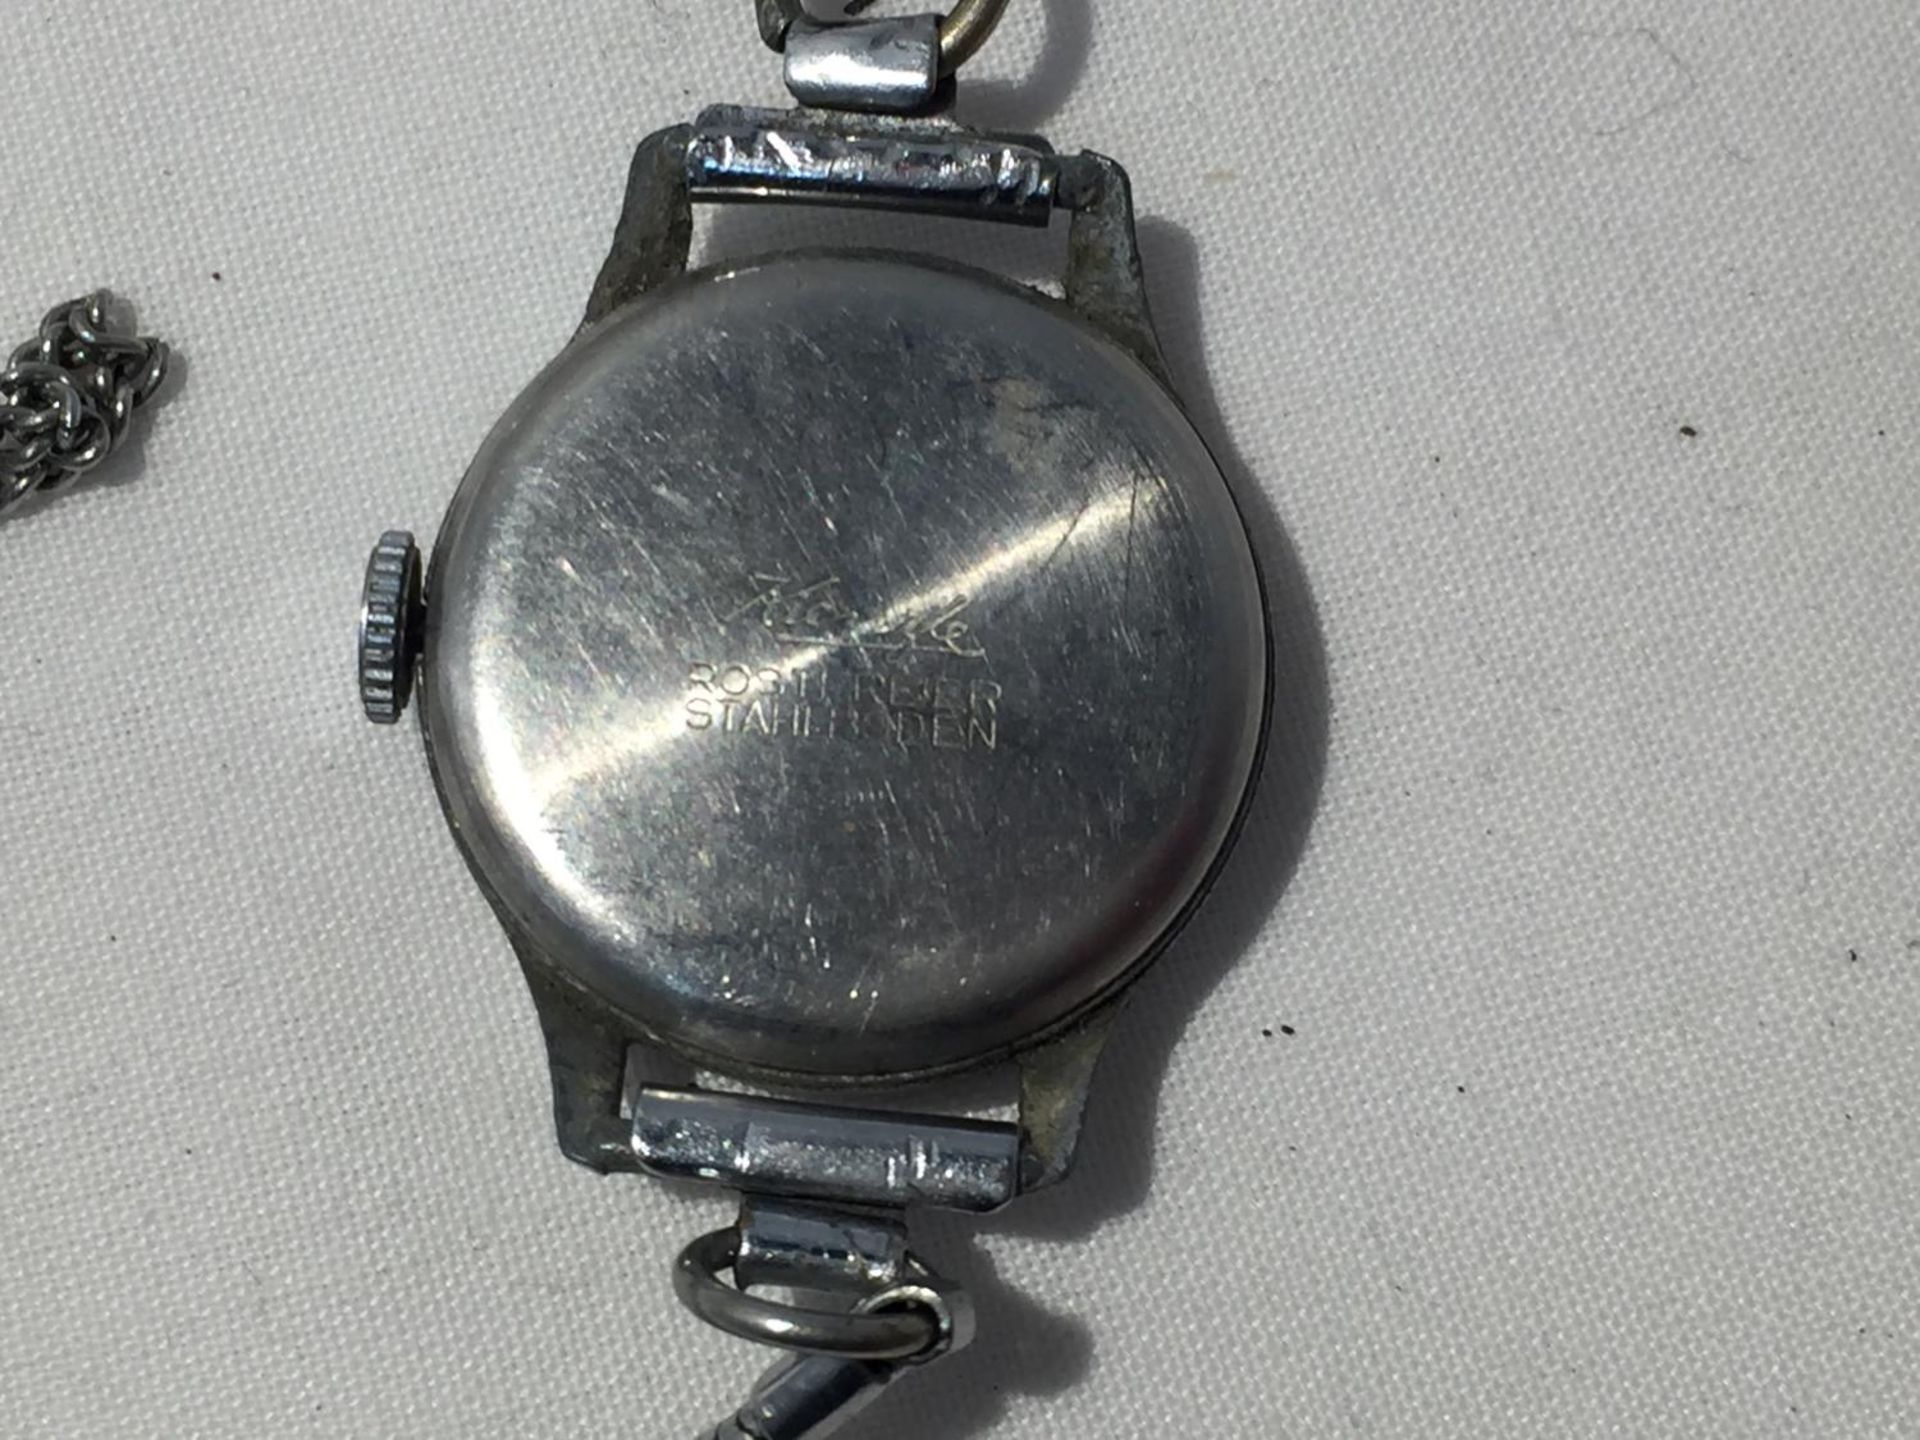 TWO WWI TRENCH WATCHES SEEN WORKING BUT NO WARRANTY - Image 7 of 8